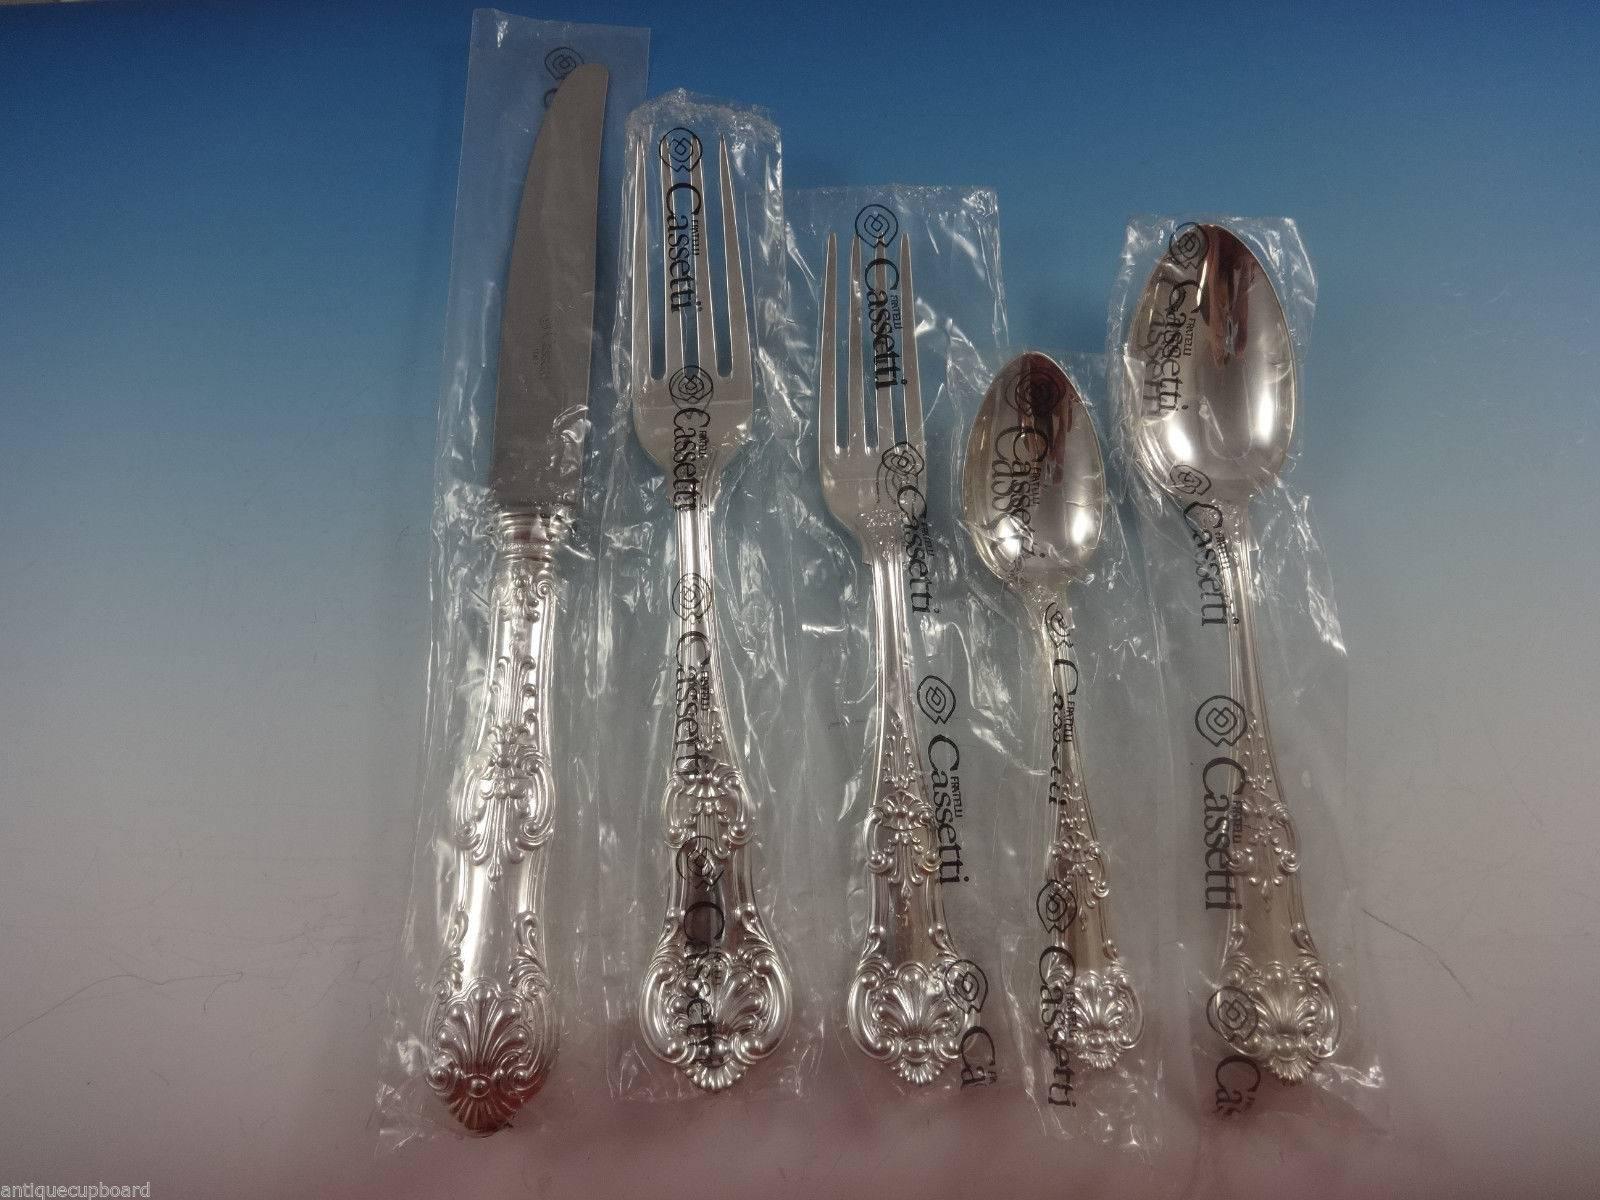 Beautiful LORENA BY CASSETTI sterling silver Flatware set - 67 Pieces. This is a 